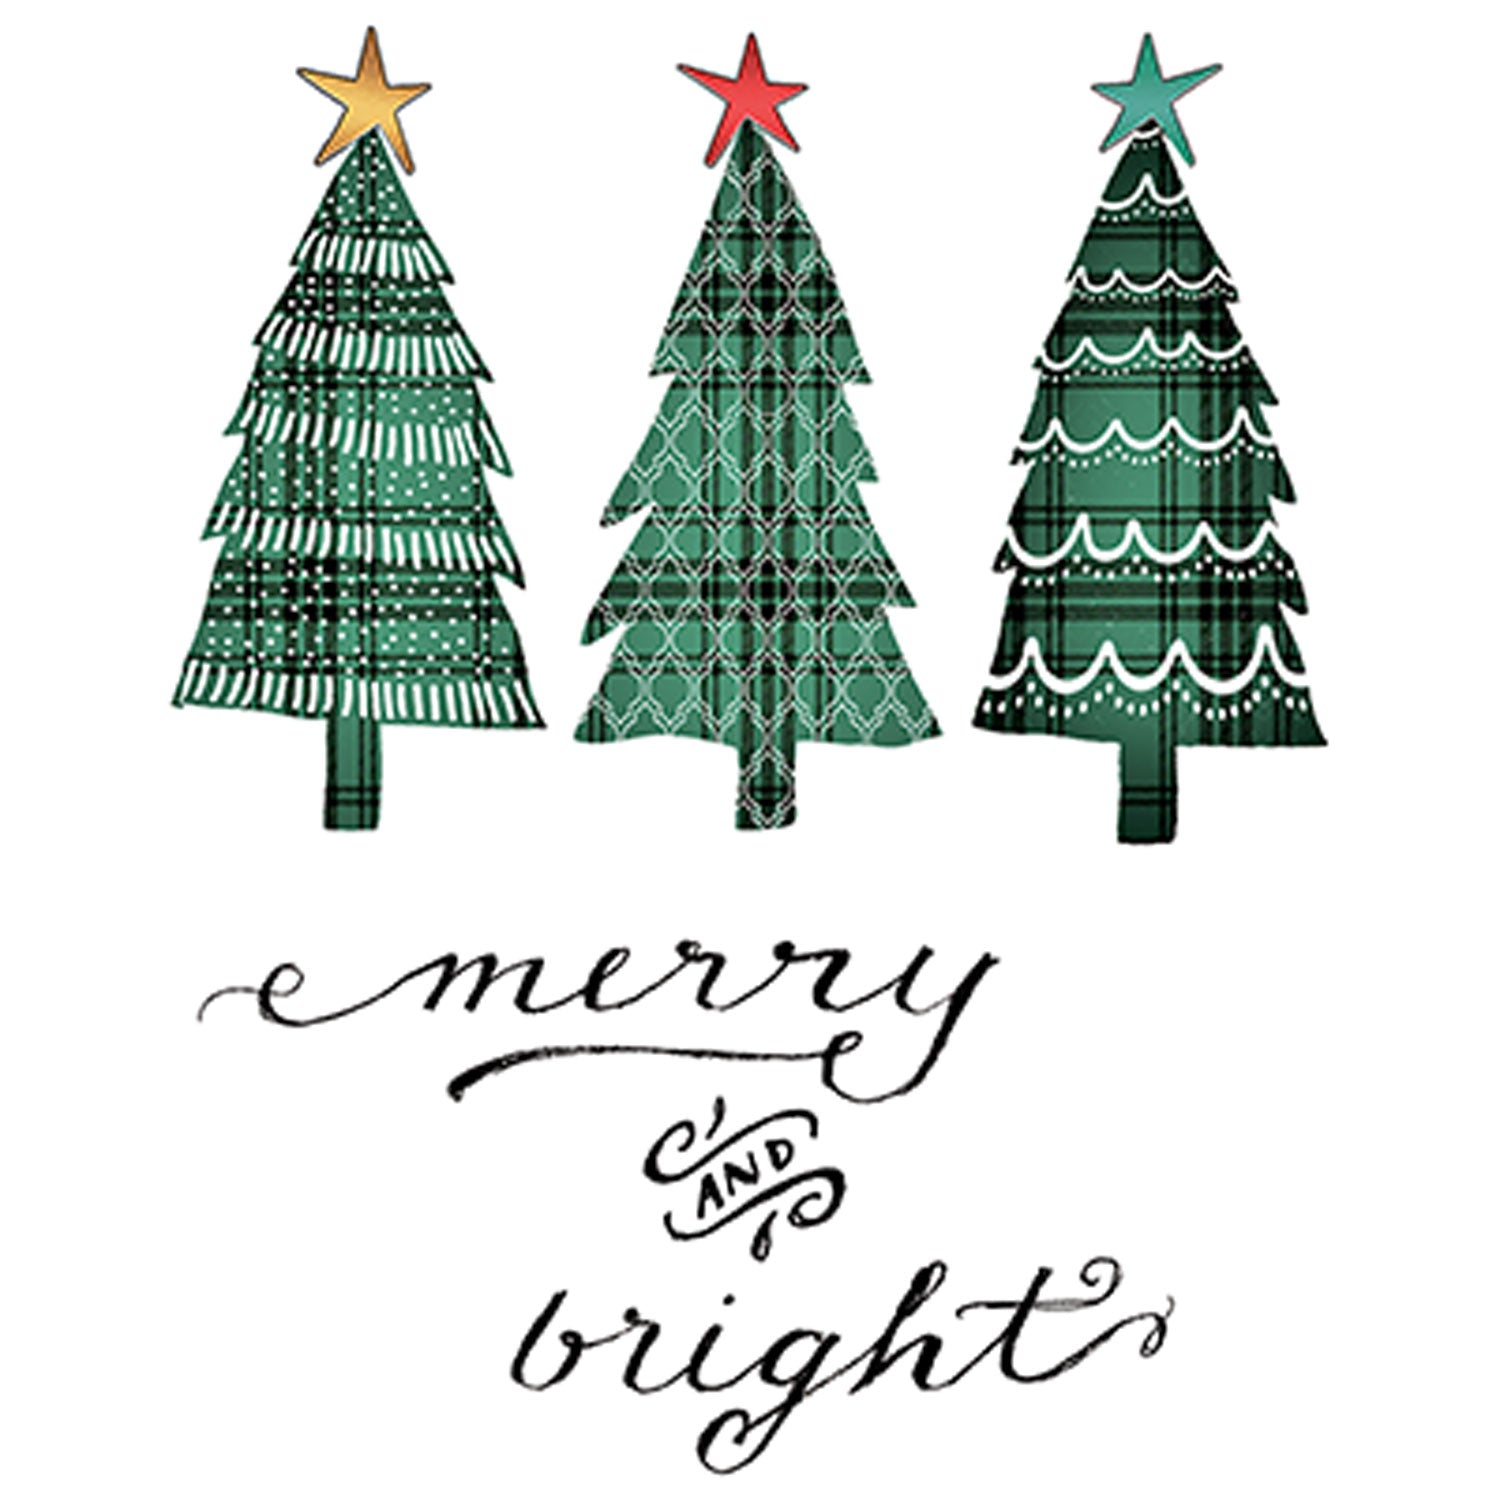 Merry Bright with Trees Printed T-Shirt-Black